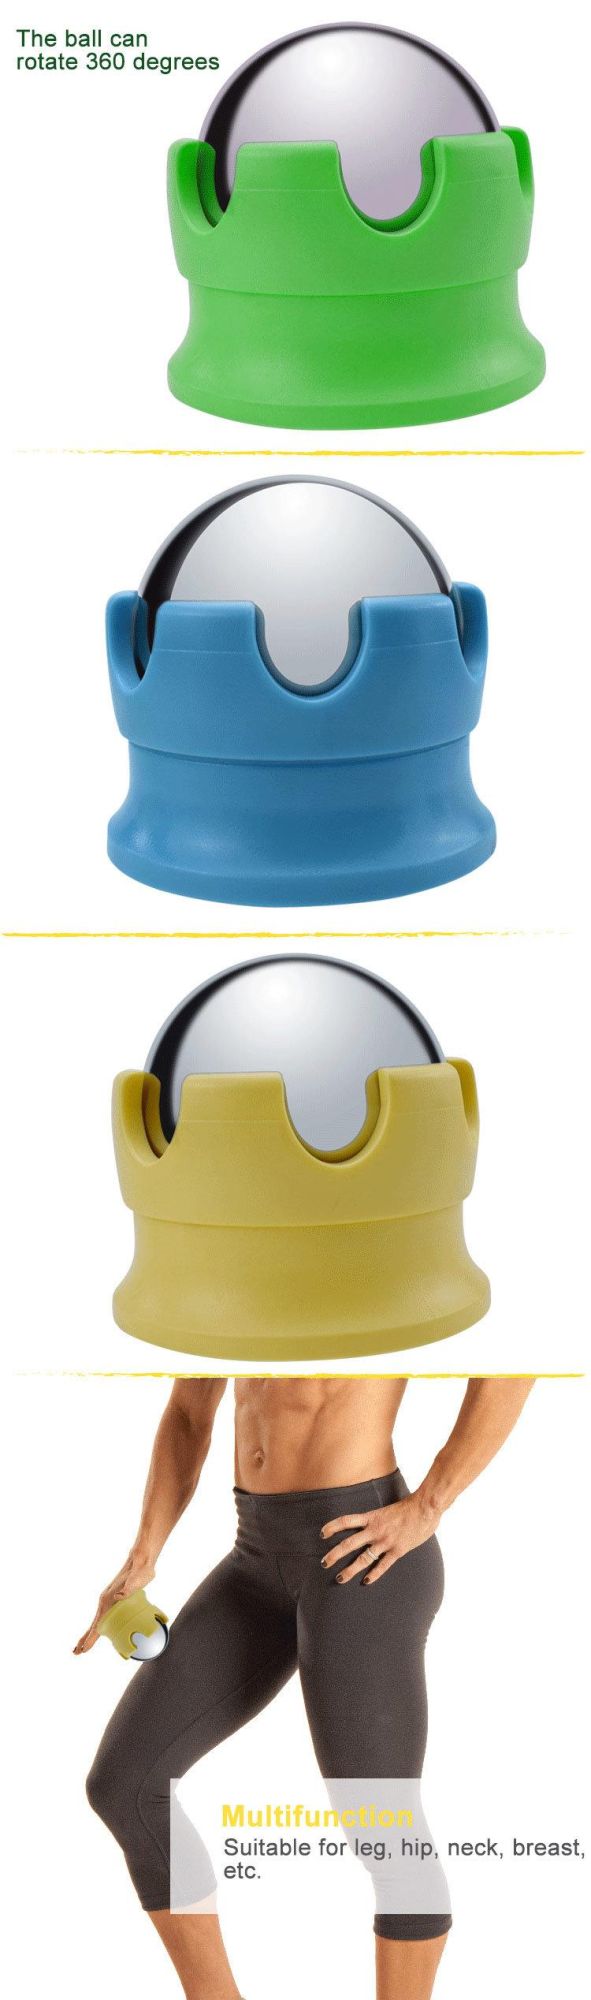 Pain Relief PP Base Massage Roller Ball